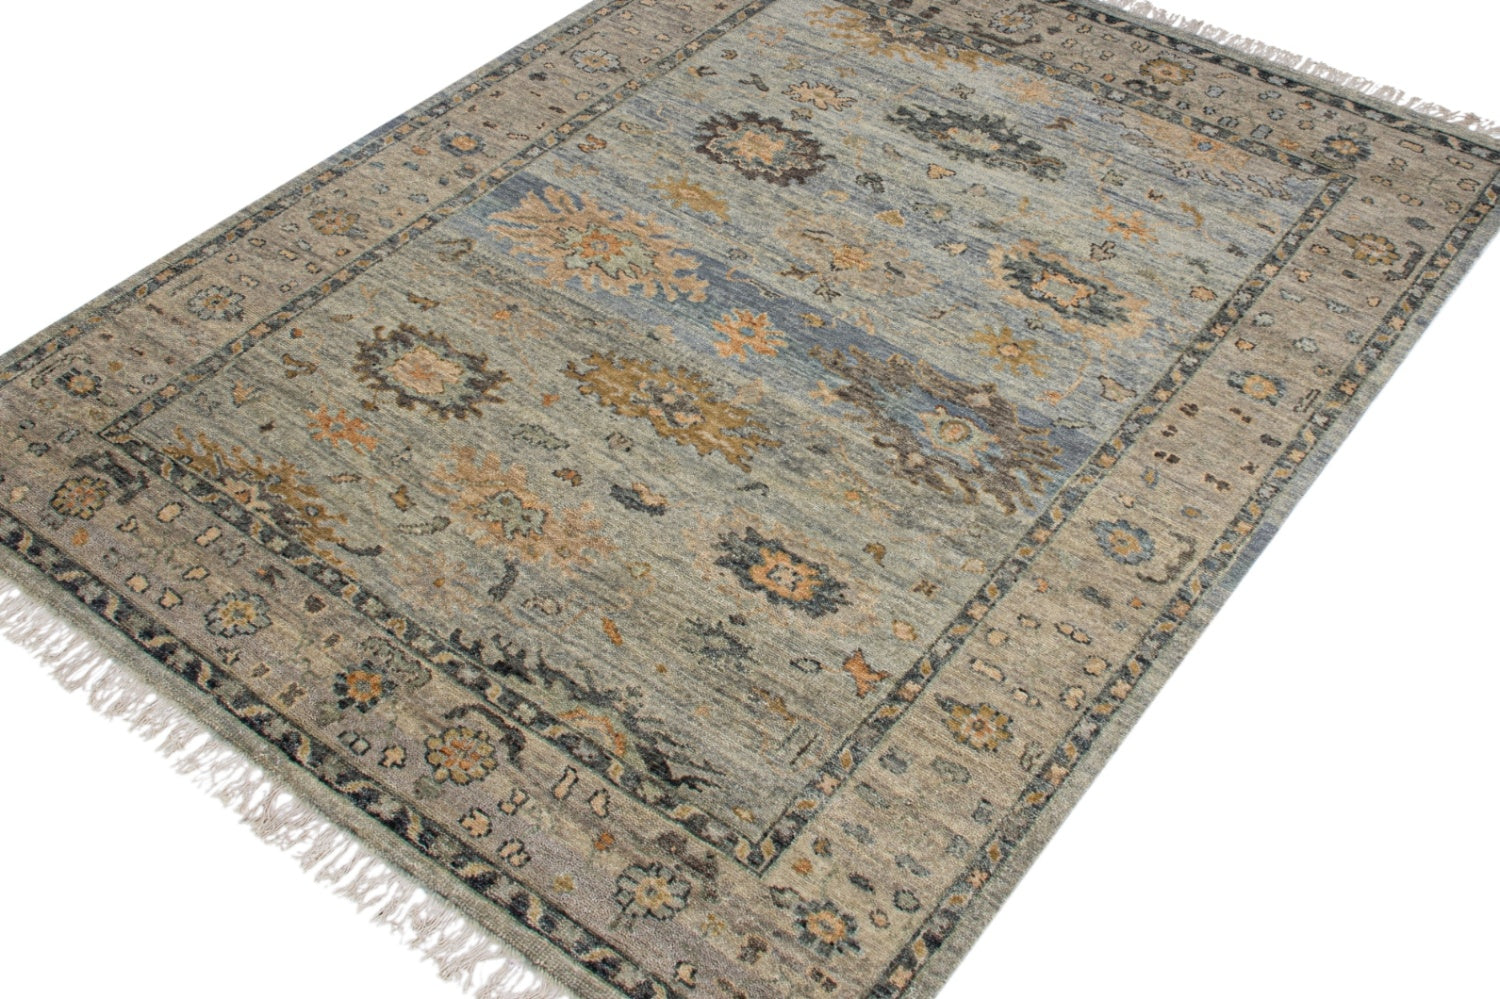 Sultanabad 1 Handwoven Traditional Rug, J72597